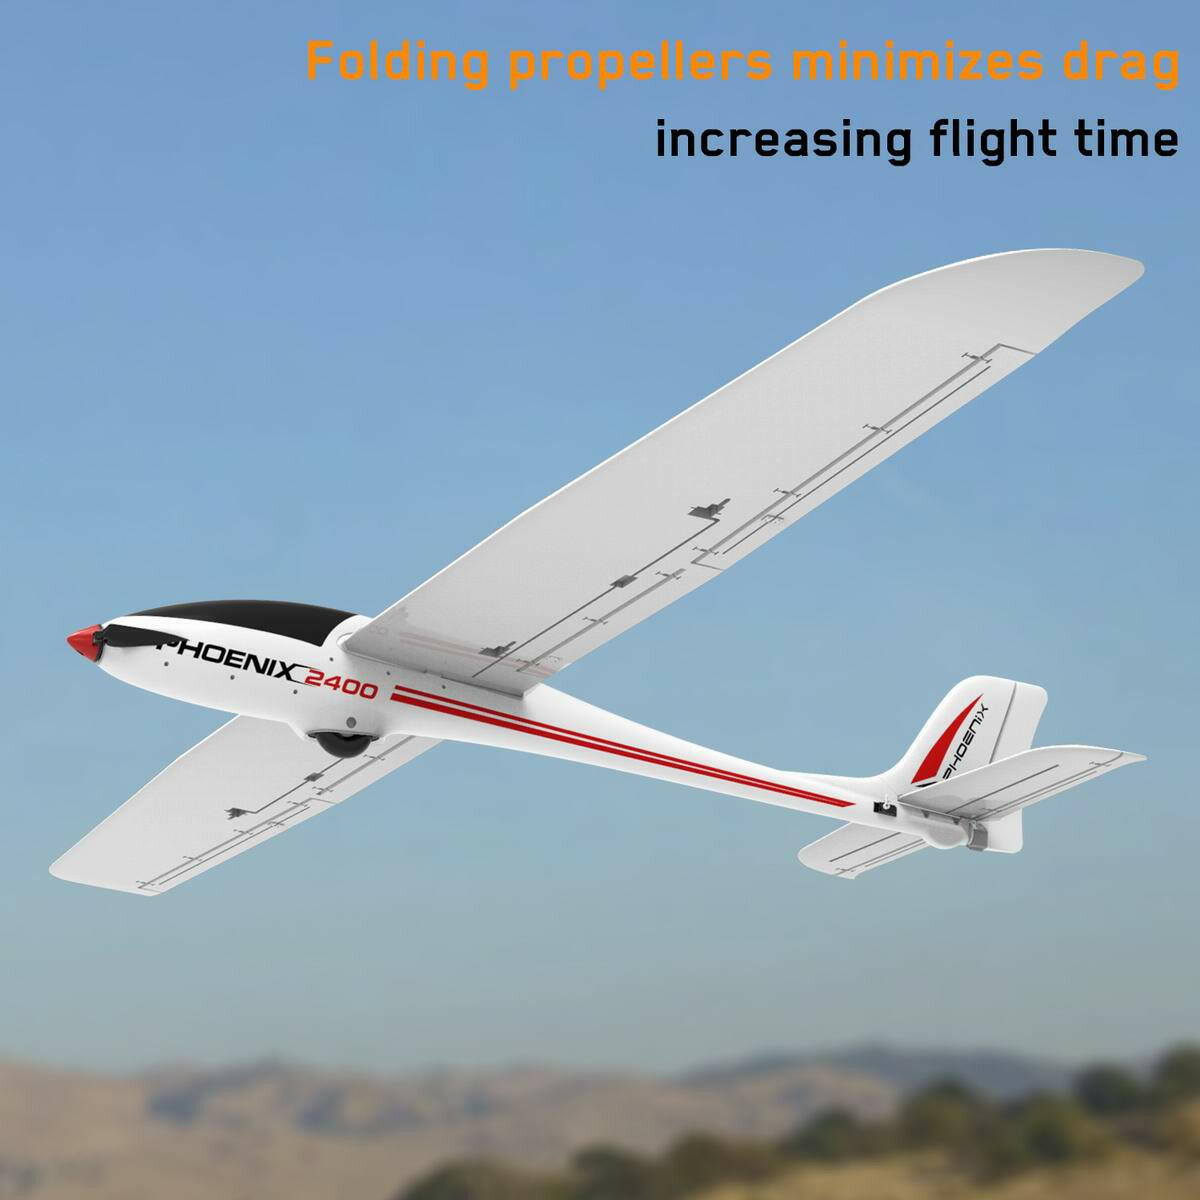 Phoenix 2400 5 Channel Glider with 2.4 Meter Wingspan and Plastic Fuselage (759-3) PNP.